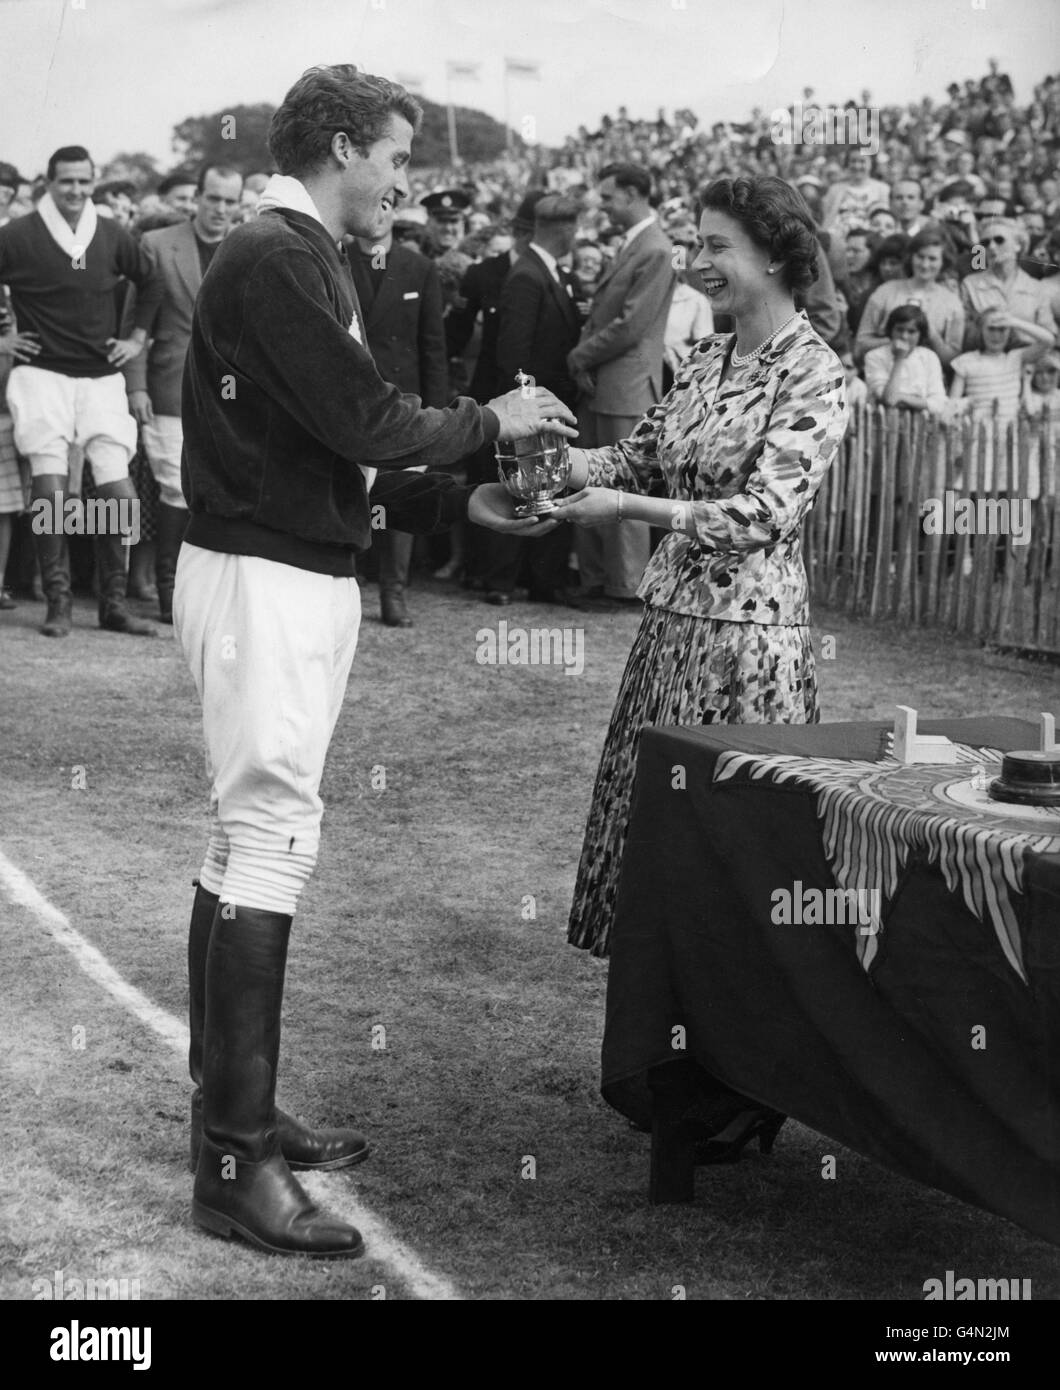 Queen Elizabeth II presents the Royal Windsor Cup to John Nelson of the Argentine team, Media Lunia, after they had beaten Friar Park in the final of the polo match on Smith's Lawn, Windsor Great Park. Stock Photo